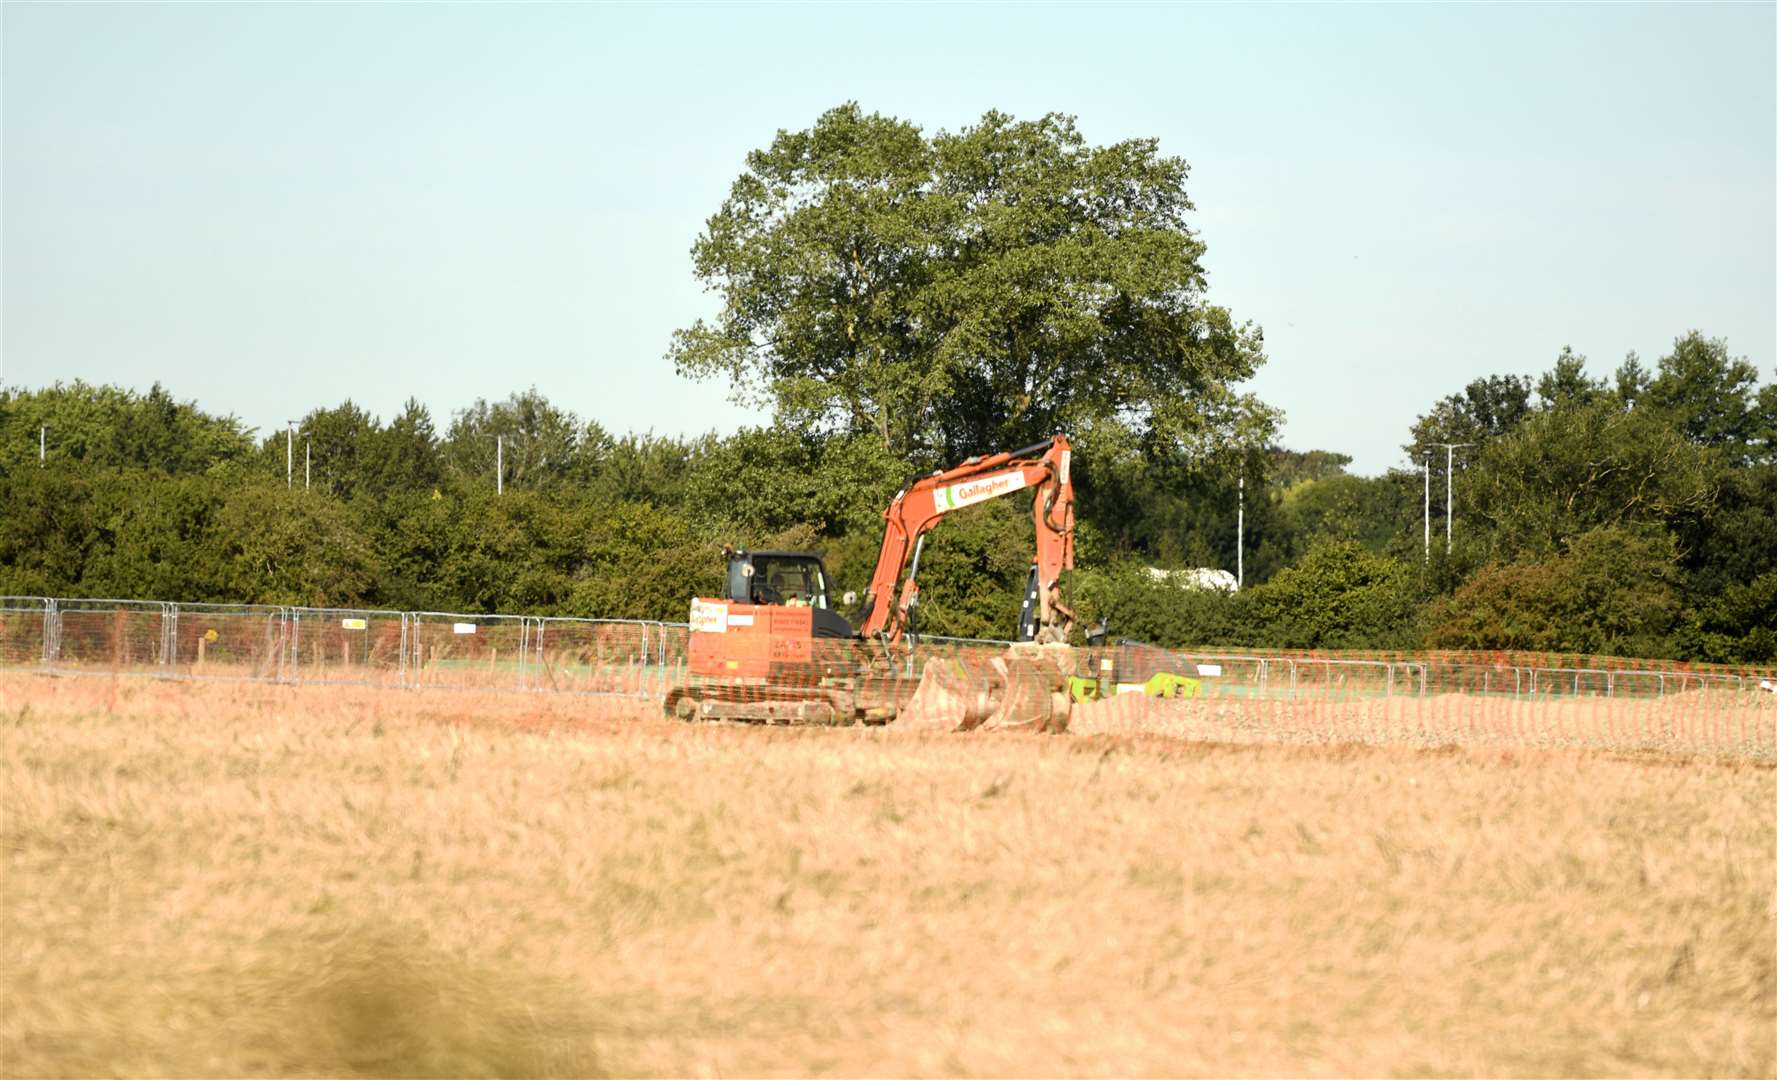 Contractors are working on the Sevington site, which was previously earmarked for an industrial estate